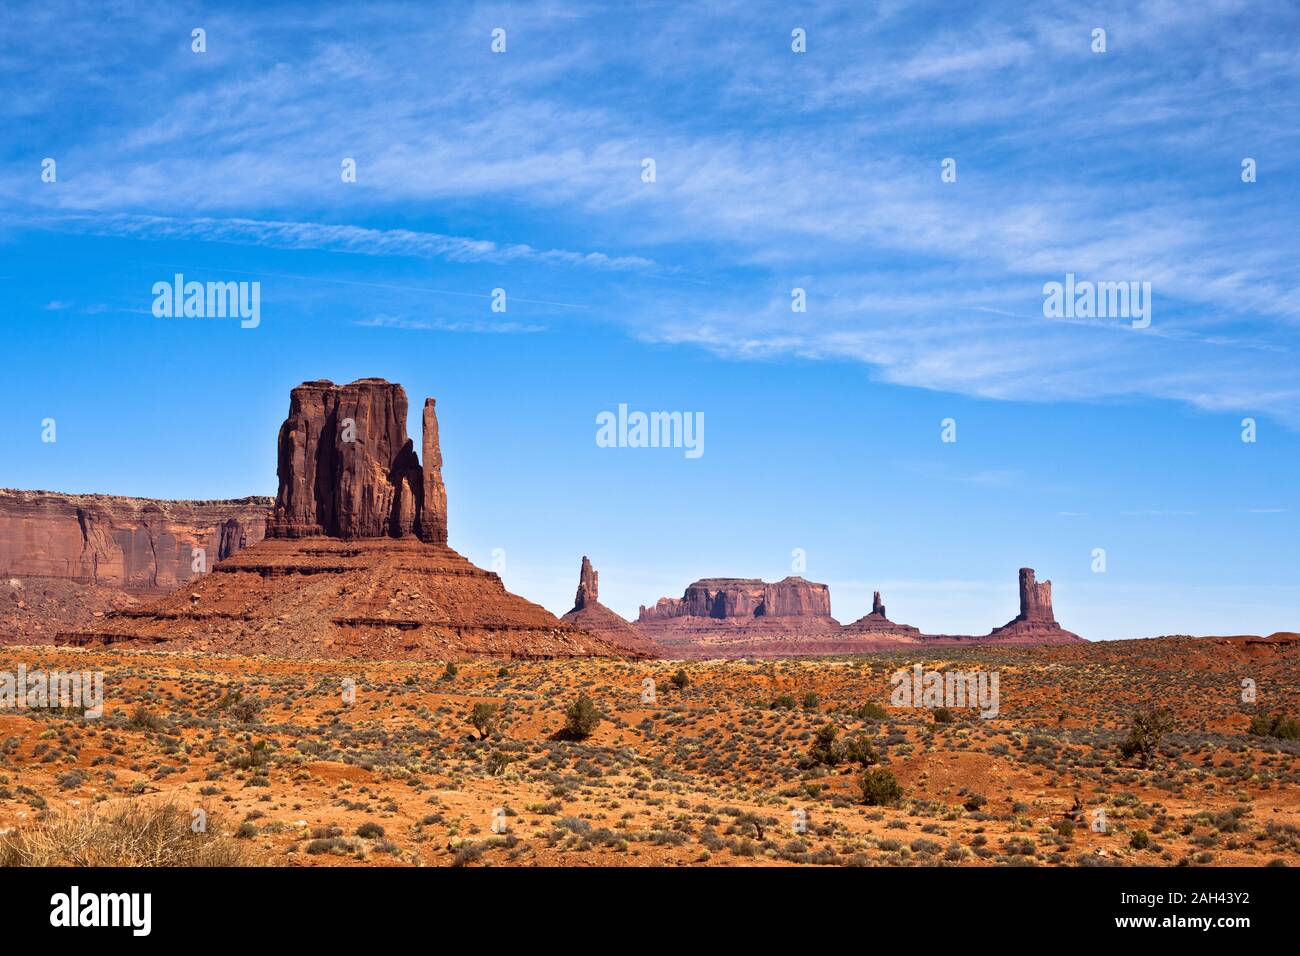 USA, Arizona, Mittens butte in Monument Valley Stock Photo